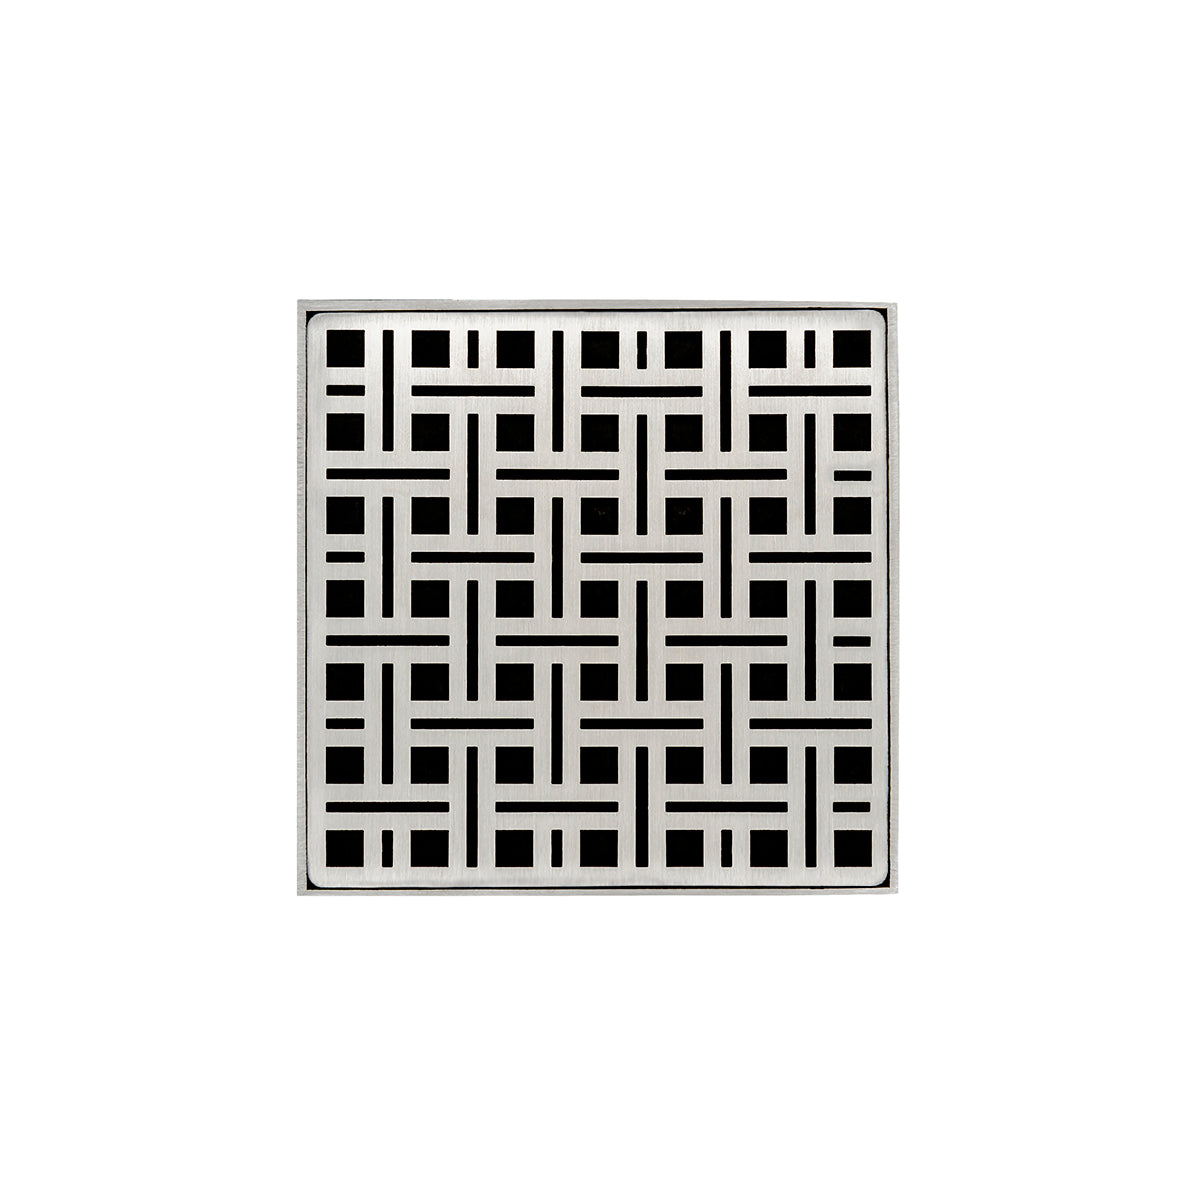 Infinity Drain 5" x 5" VDB 5 Premium Center Drain Kit with Weave Pattern Decorative Plate with Stainless Steel Bonded Flange Drain Body, 2" No Hub Outlet